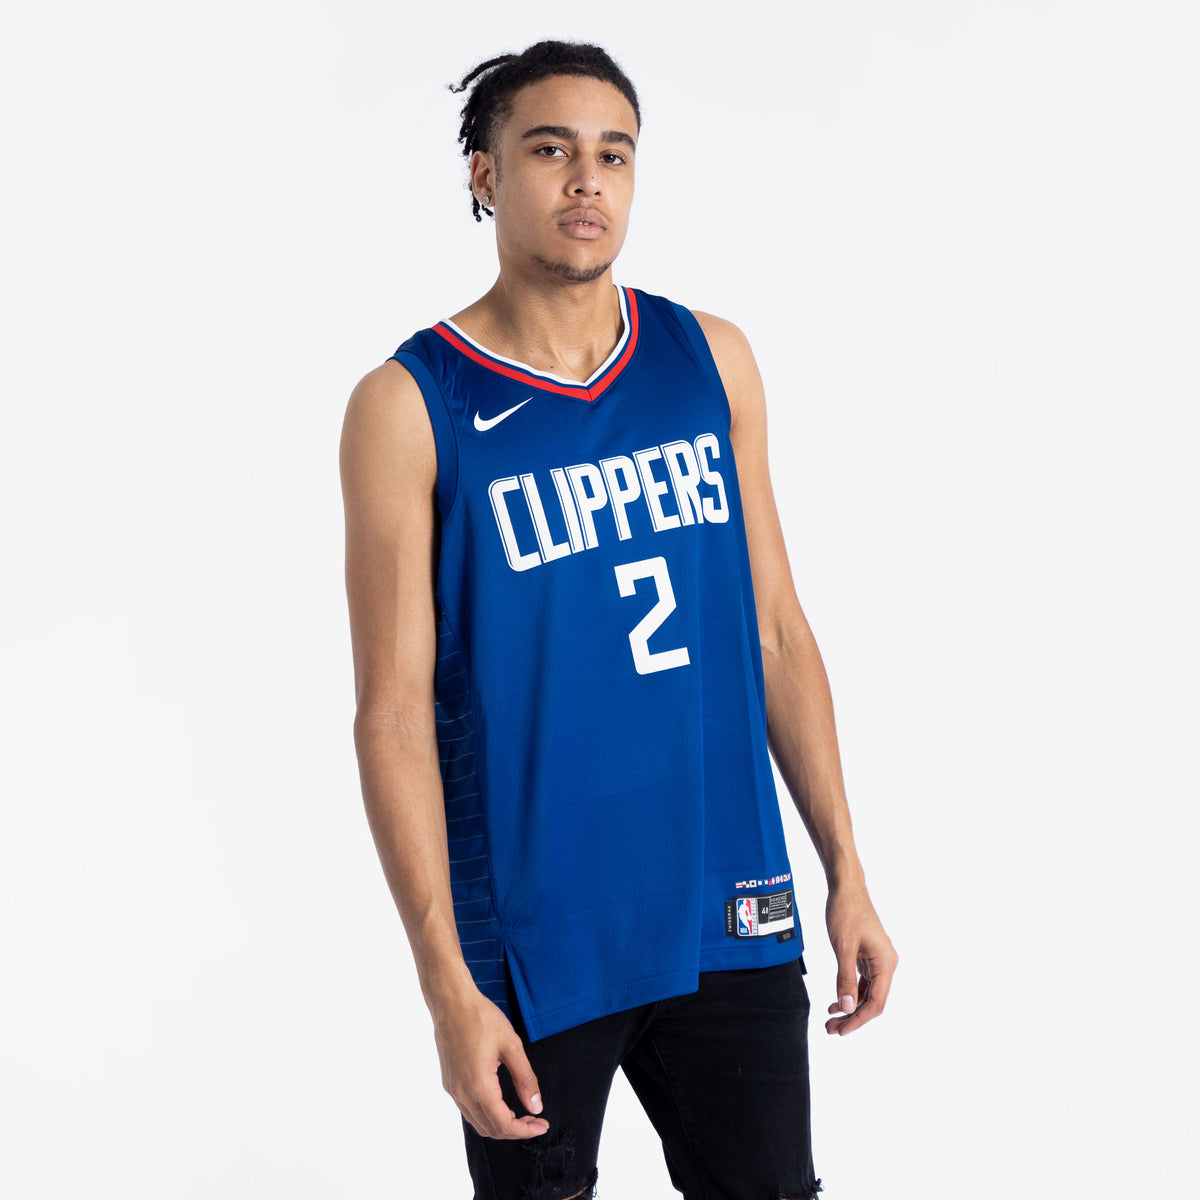 Los Angeles Clippers 2022 23 Jersey [Statement Edition] – Kawhi